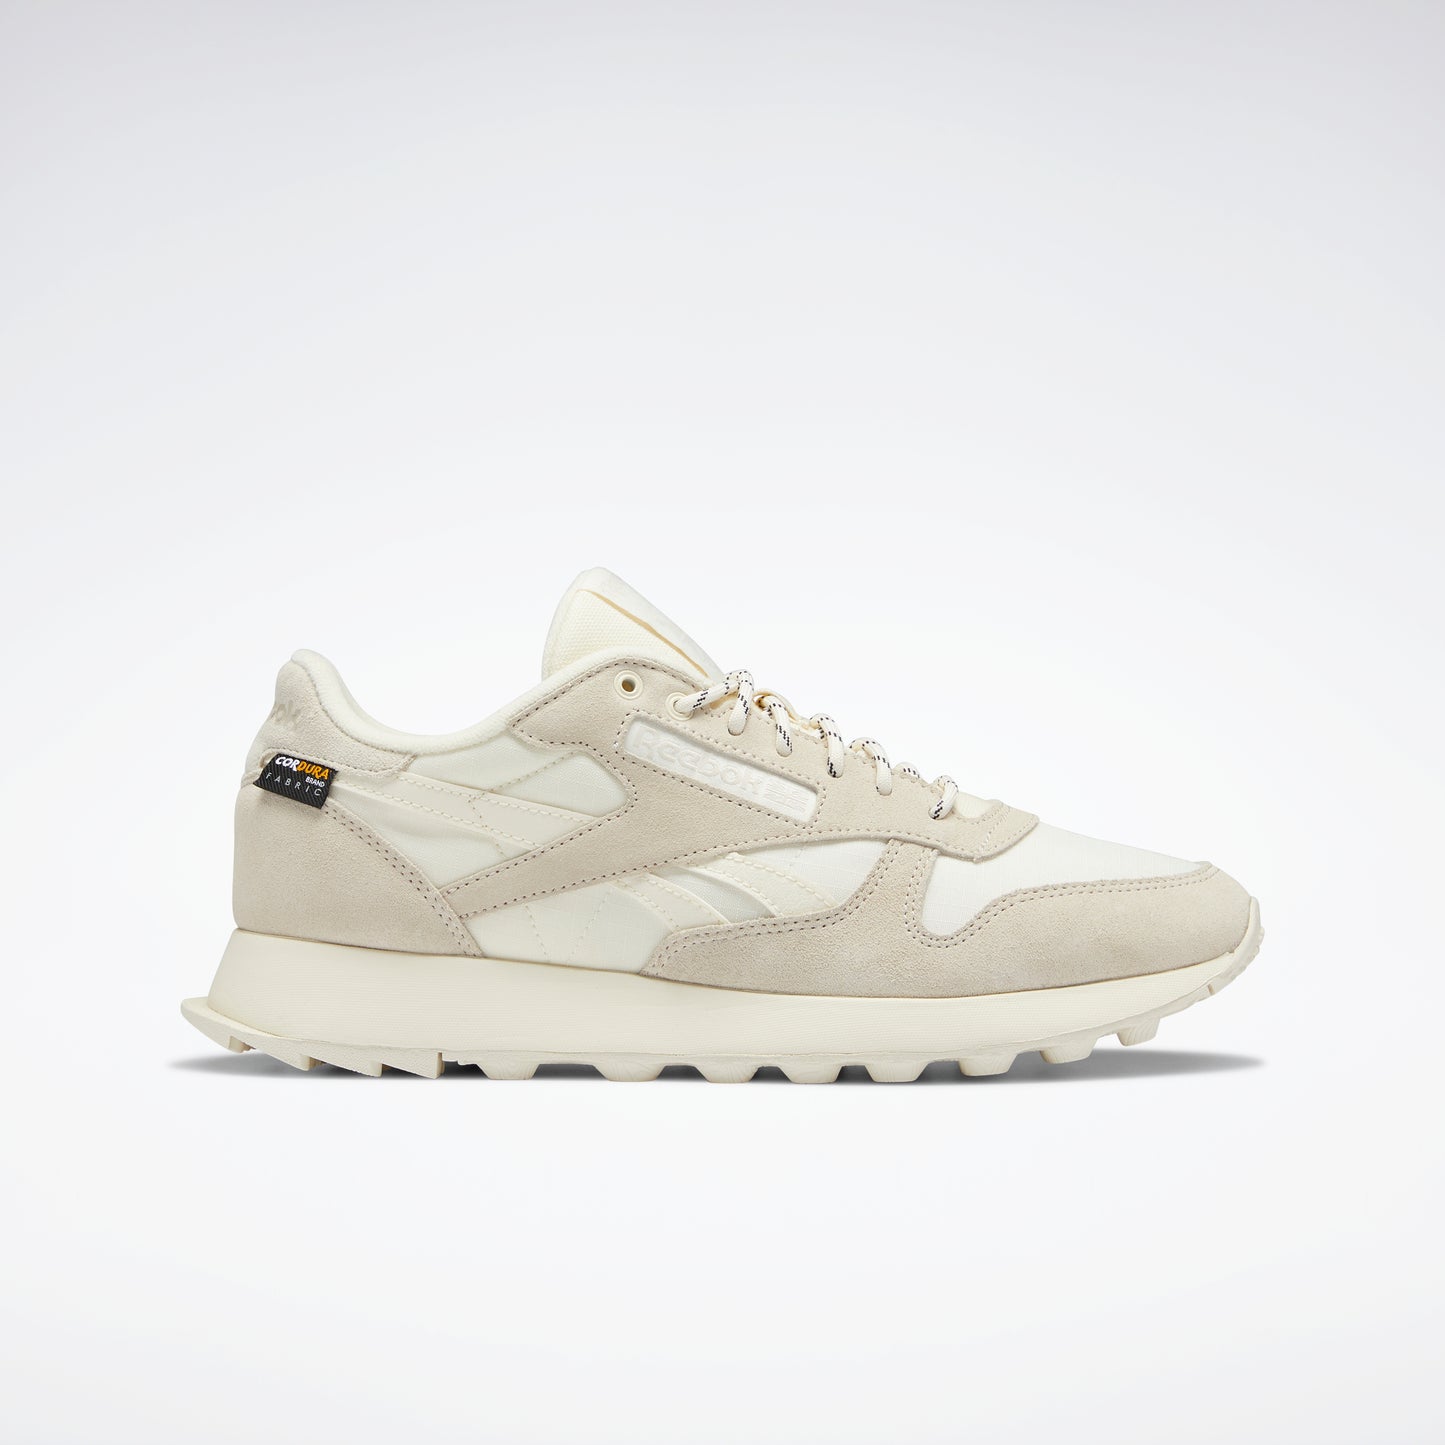 Chaussures Reebok Footwear Hommes Classic Leather Shoes Clawht/Clawht/Stucco